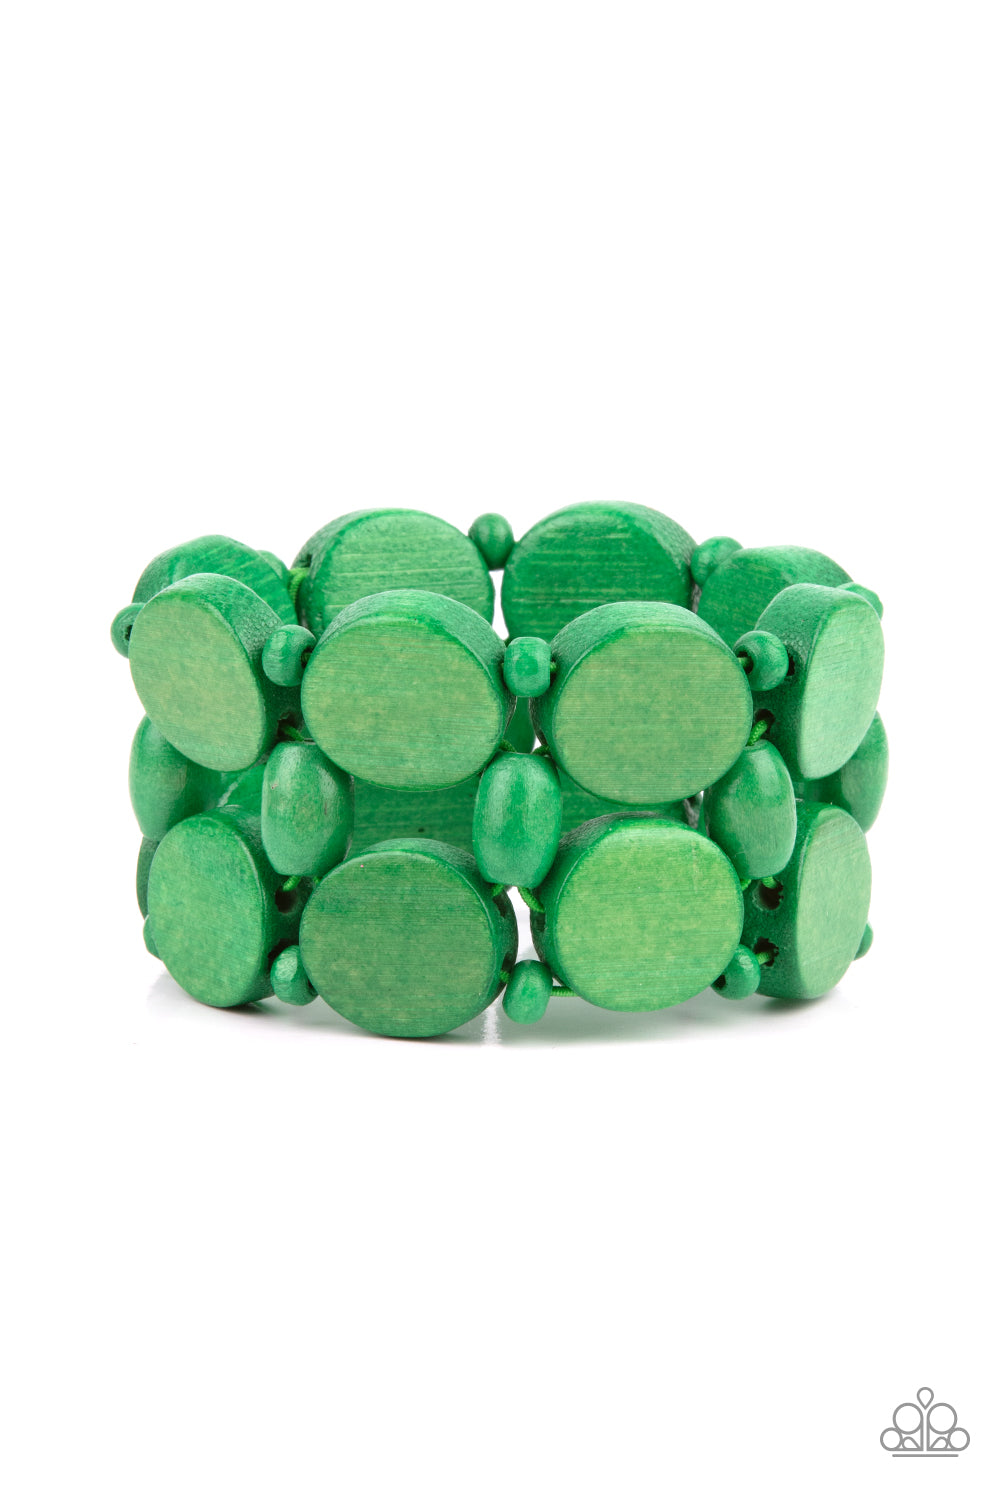 Beach Bravado Green Wooden Bracelet - Paparazzi Accessories  Earthy green wooden discs and beads are threaded along braided stretchy bands around the wrist, creating a summery display.  All Paparazzi Accessories are lead free and nickel free!  Sold as one individual bracelet.